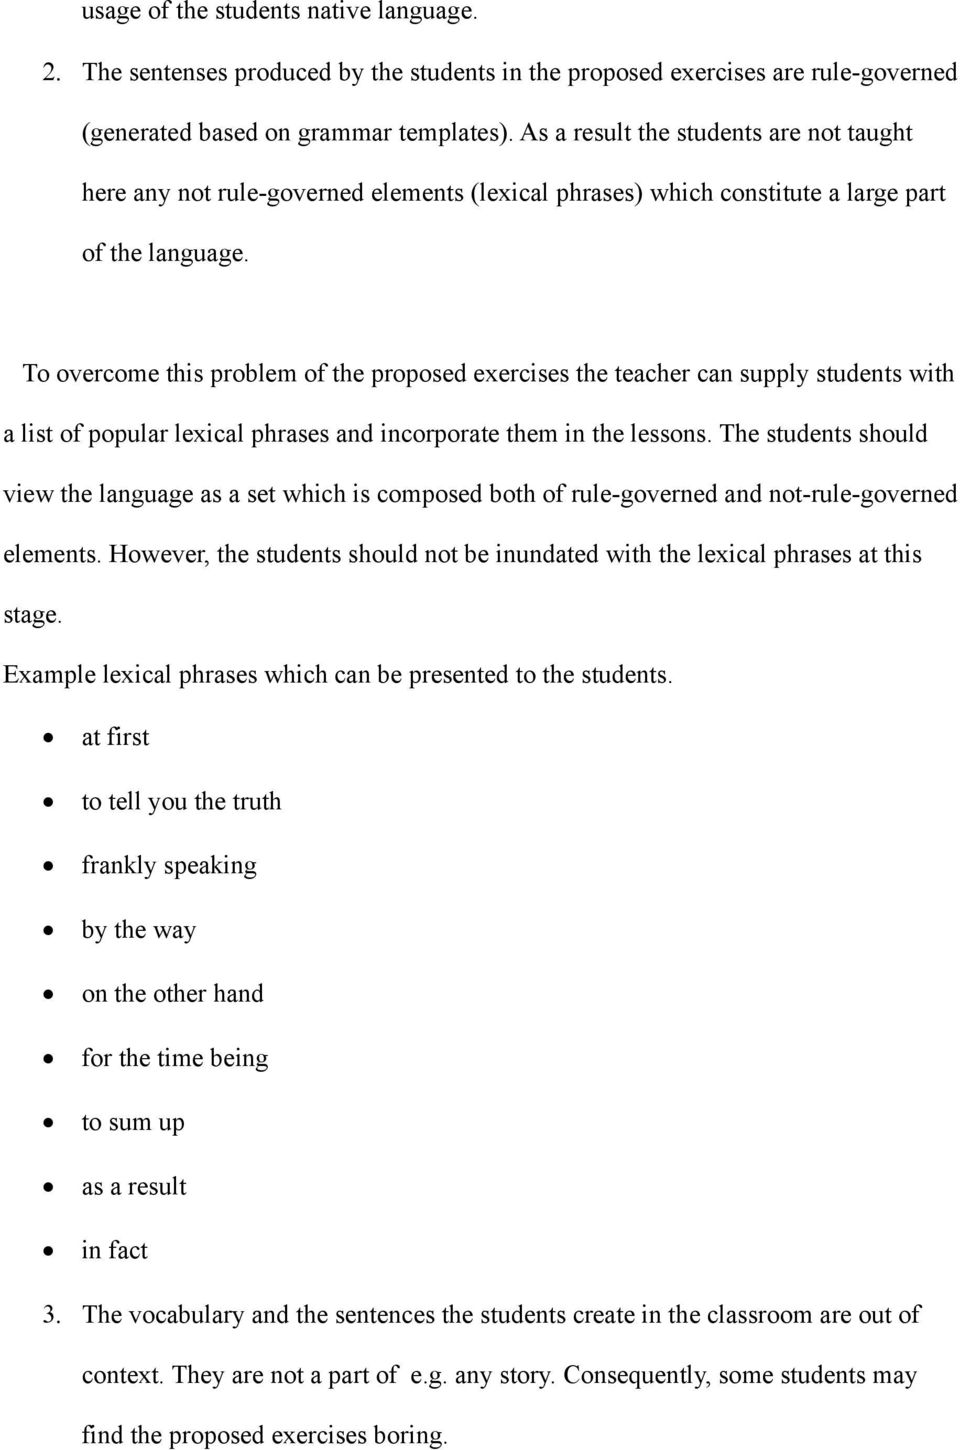 To overcome this problem of the proposed exercises the teacher can supply students with a list of popular lexical phrases and incorporate them in the lessons.